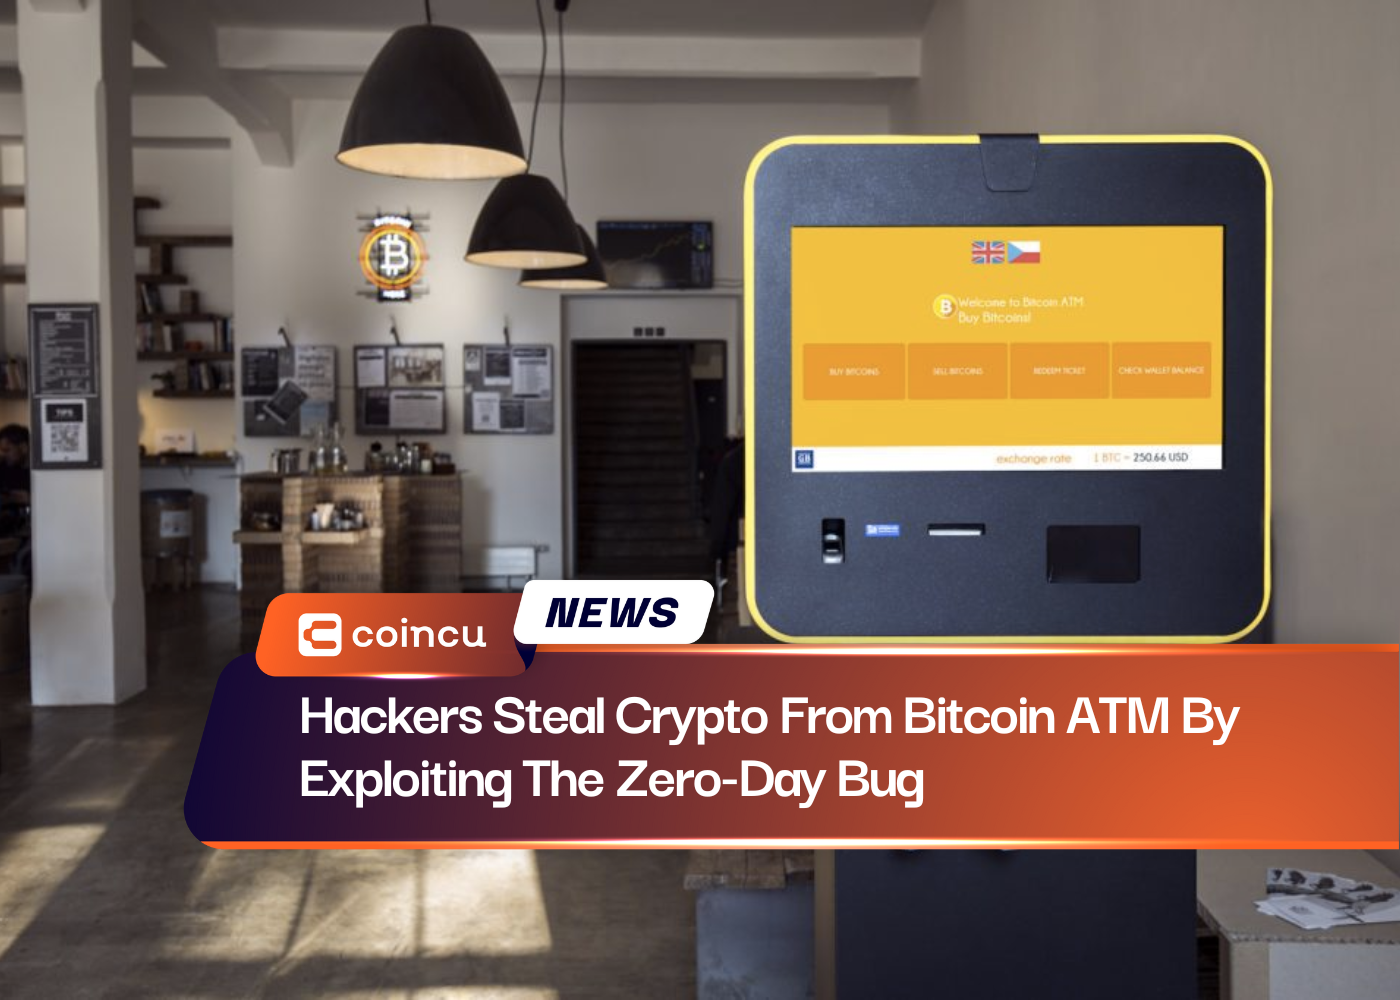 Hackers Steal Crypto From Bitcoin ATM By Exploiting The Zero-Day Bug